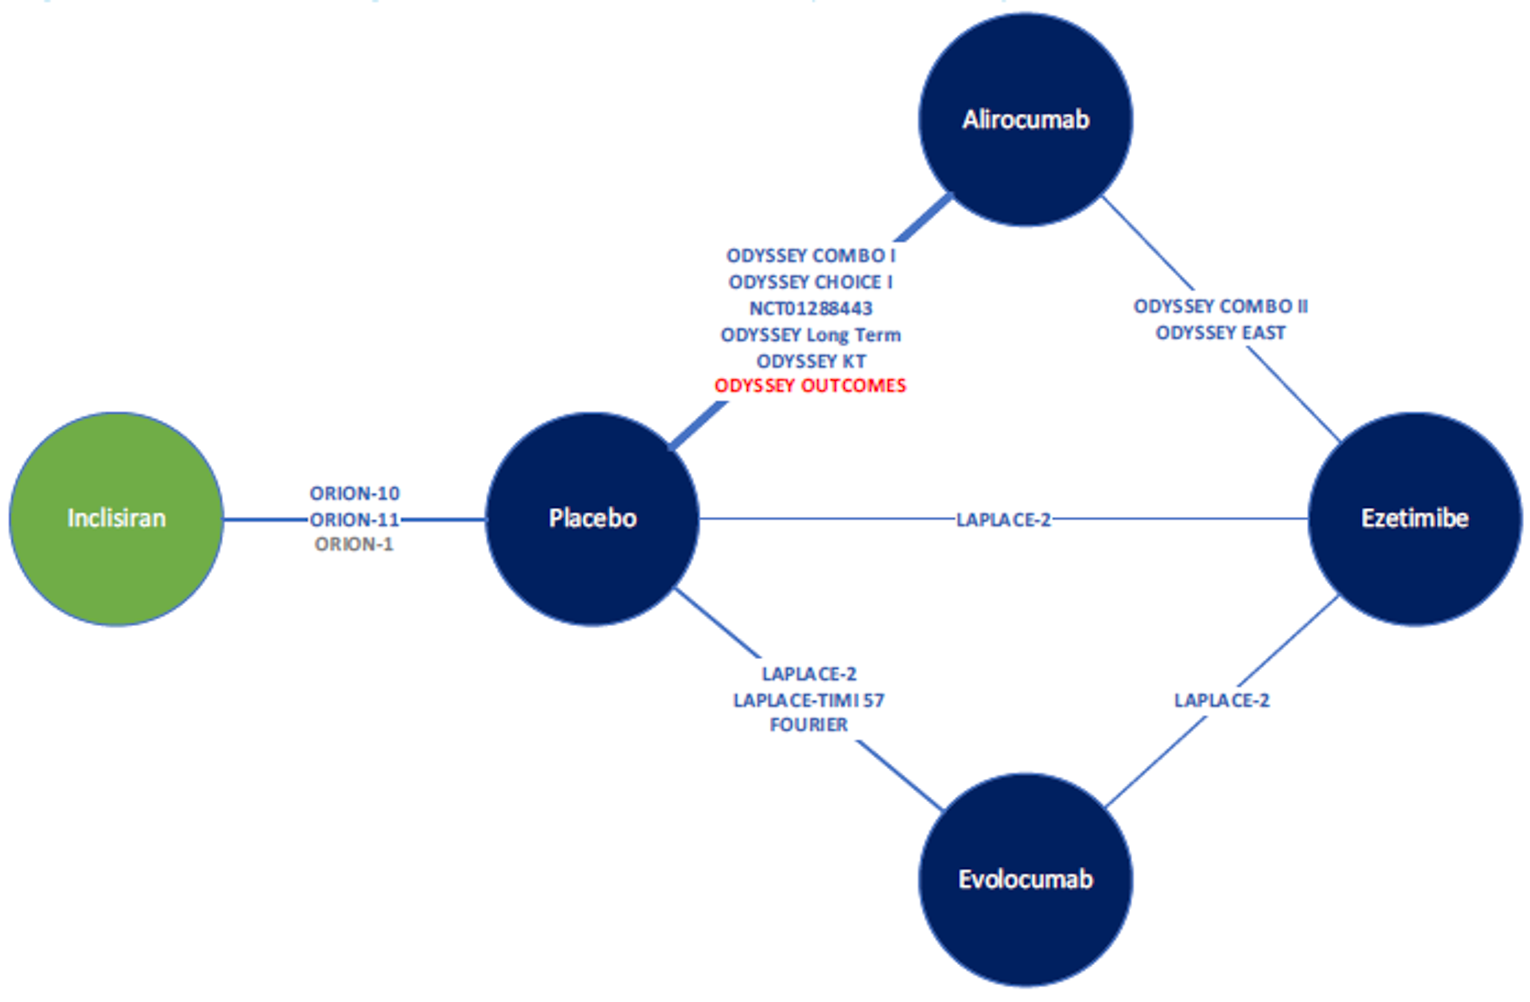 Network diagram for the NMA on ASCVD and ASCVD risk–equivalent populations on MTD statin. The evidence network consists of inclisiran, alirocumab, evolocumab, ezetimibe, and placebo. The ORION-1, ORION-10, and ORION-11 trials connect inclisiran and placebo node. Six trials connect the alirocumab and placebo nodes (ODYSSEY COMBO I, ODYSSEY CHOICE I,NCT01288443, ODYSSEY Long-term, ODYSSEY KT, and ODYSSEY OUTCOMES), and 2 trials (ODYSSEY COMBO II and ODYSSEY EAST) connect alirocumab and ezetimibe nodes. Evolocumab is connected to placebo via the LAPLACE-2, LAPLACE-TIMI57, and FOURIER trials, and is connected to ezetimibe via the LAPLACE-2 trial. Ezetimibe and placebo are also connected via LAPLACE-2.